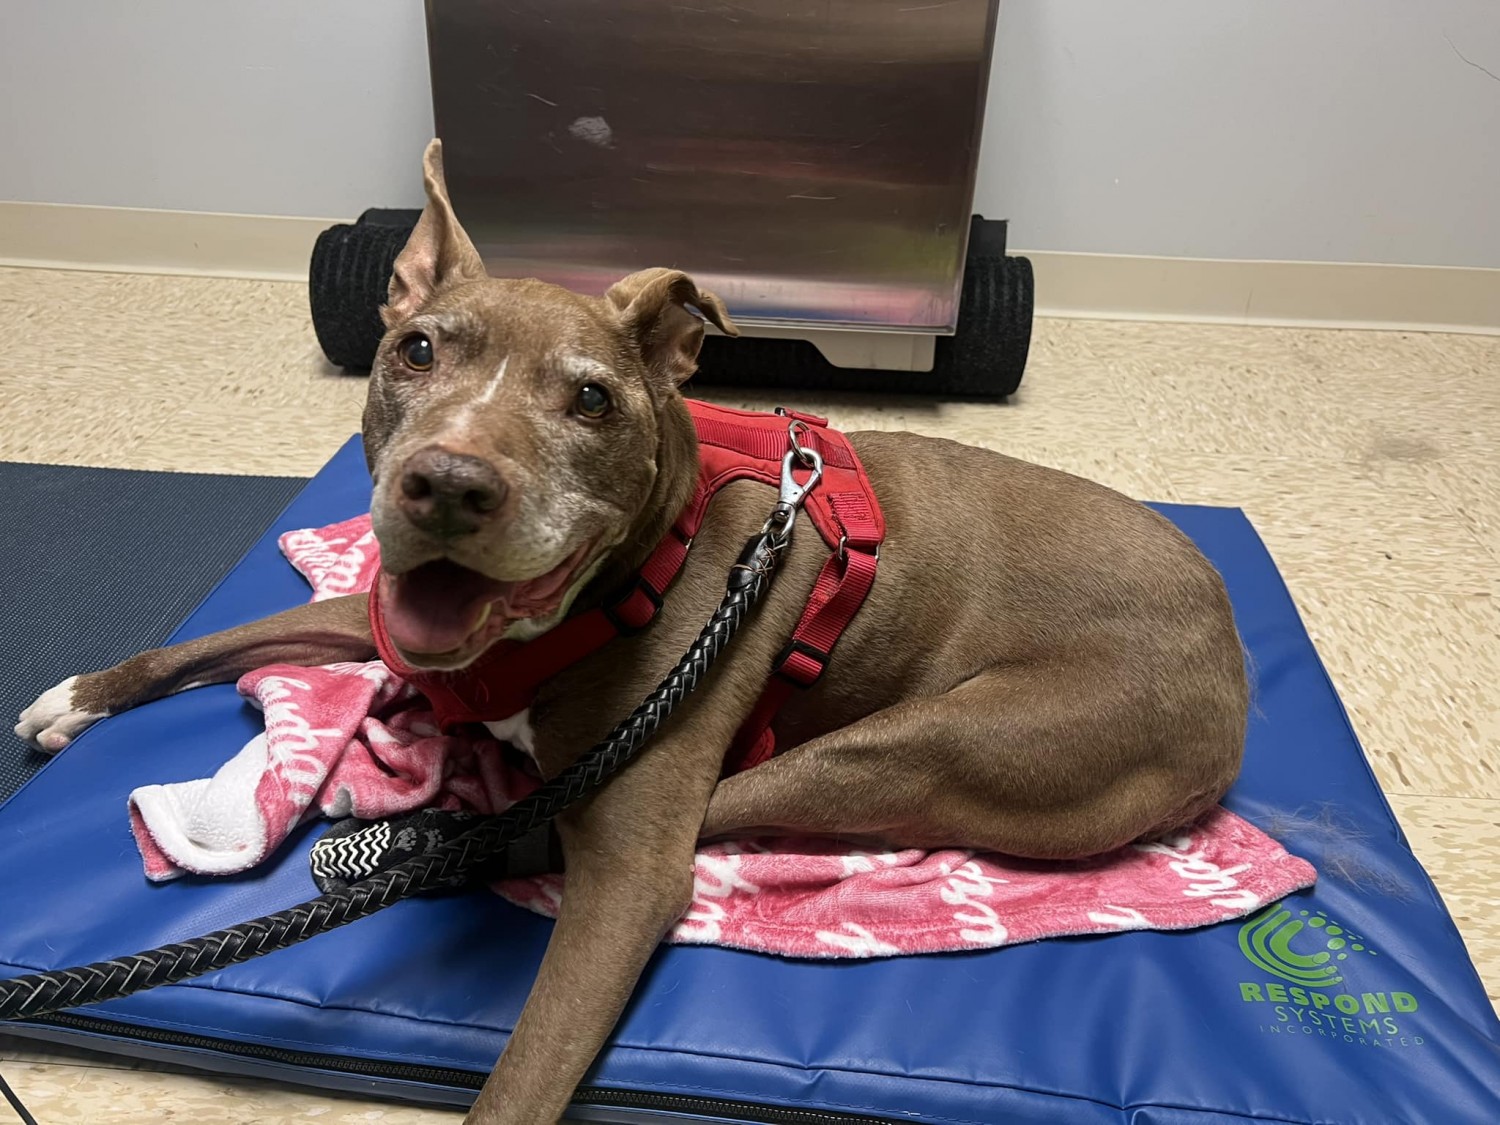 PEMF Therapy - Dog Laying on Blanket for Treatment